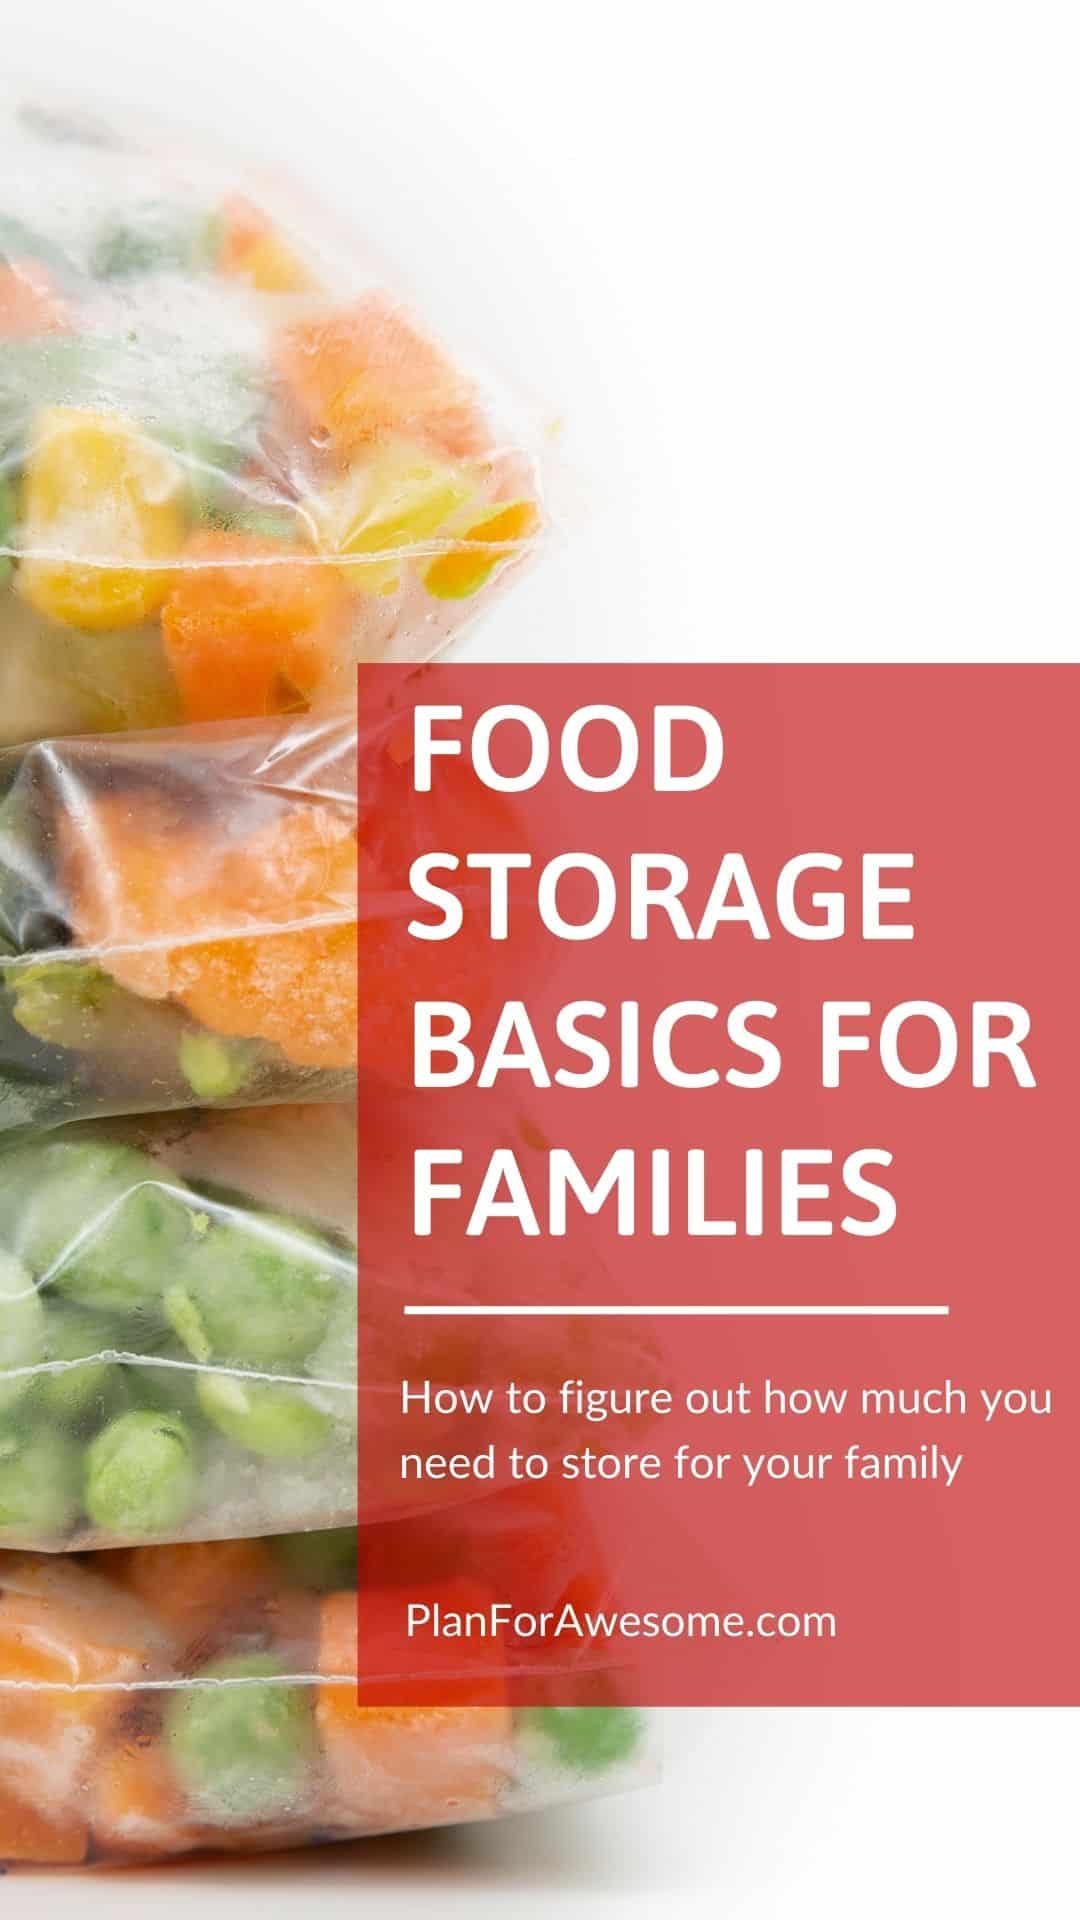 Short-Term Food Storage Basics: Part 2 - How Much Food do You Use?